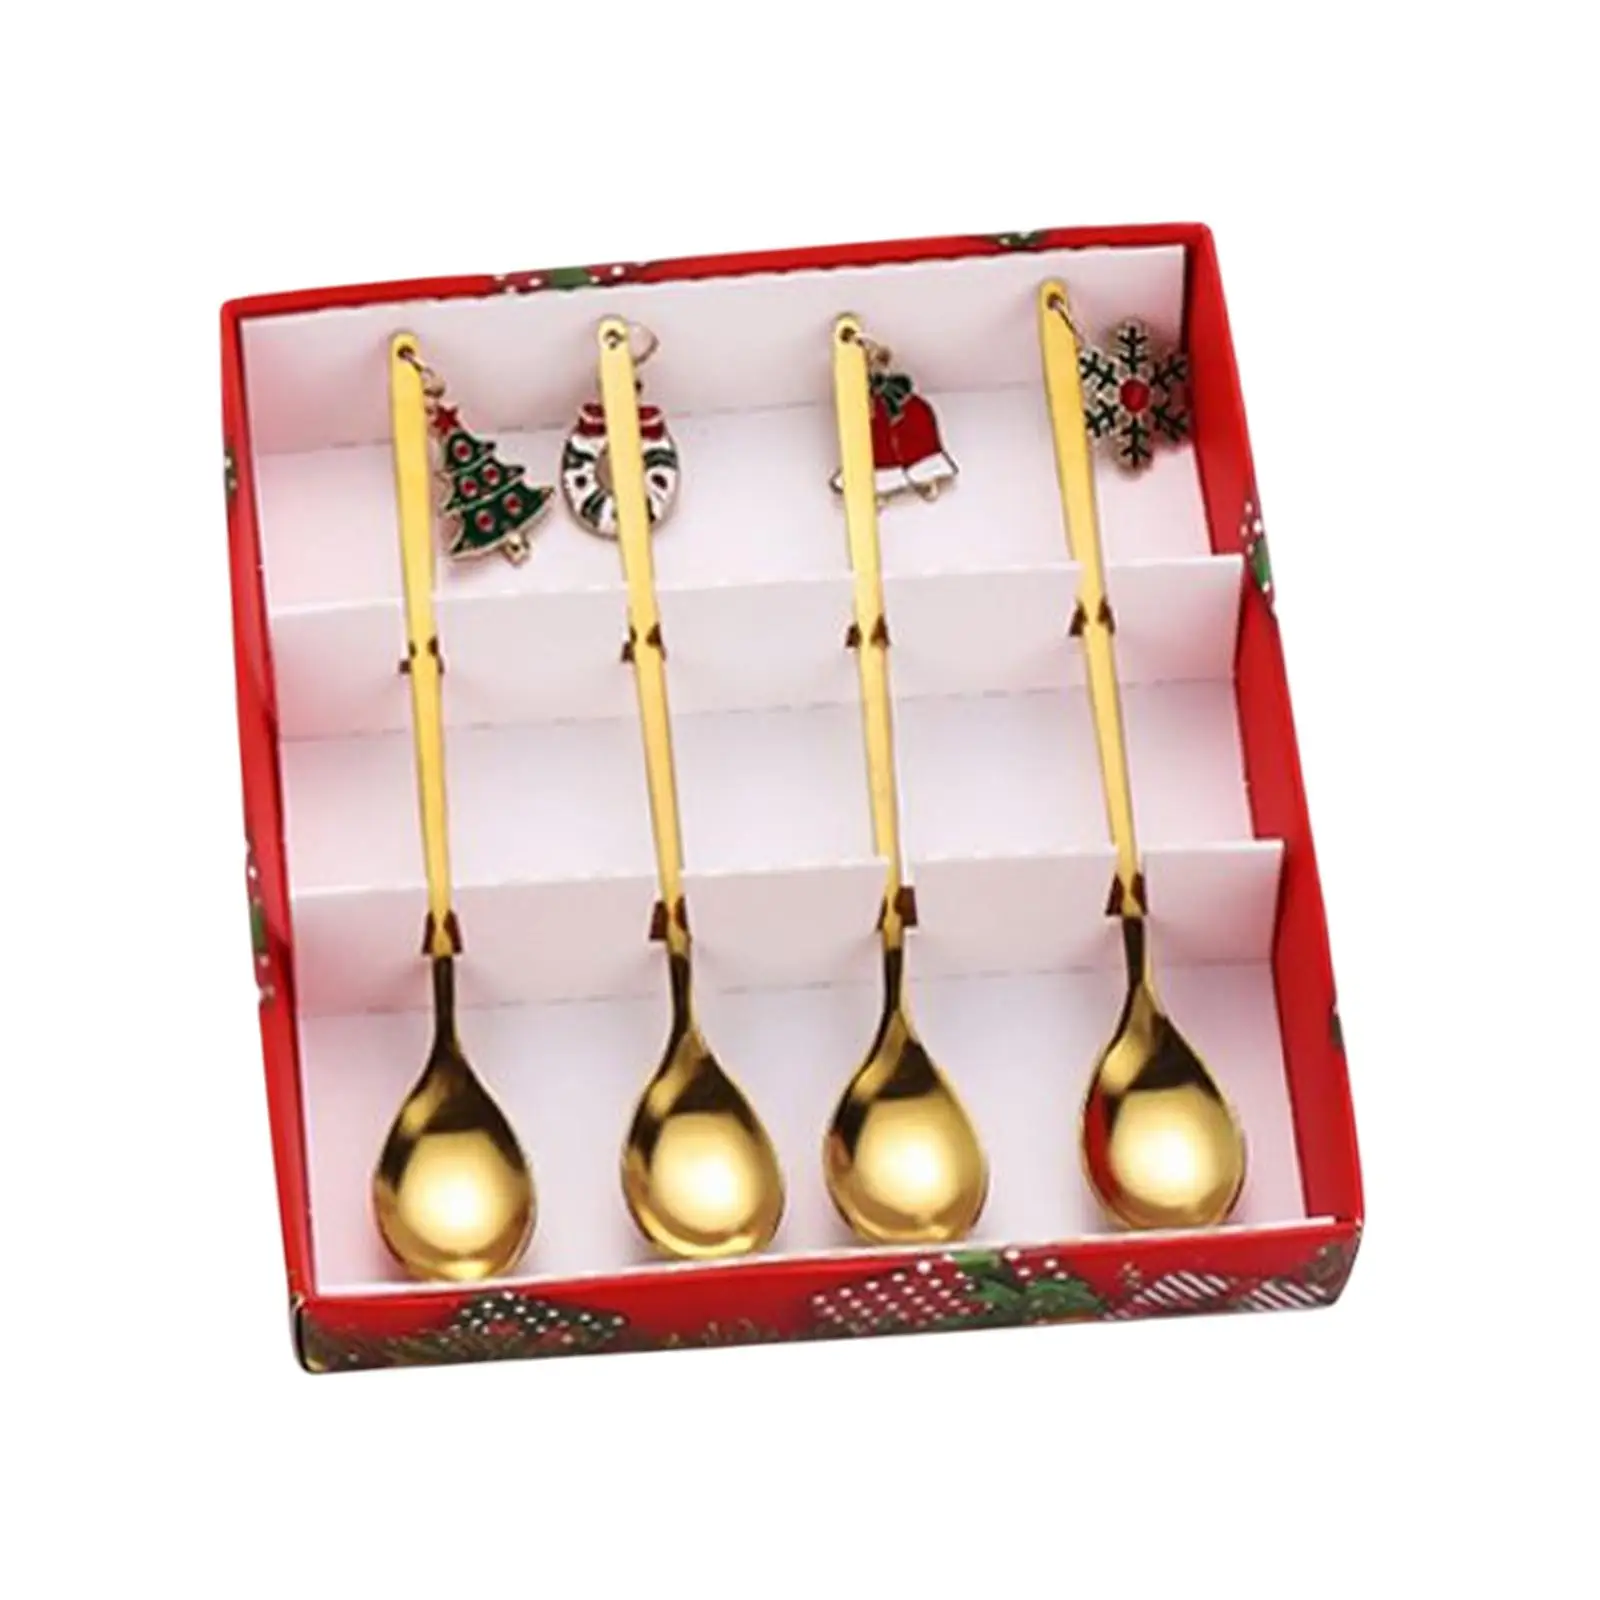 4pcs Stainless Steel Christmas Coffee Spoons Small Spoons Reusable with Gift Box Nice Coffee Stirring Spoons for Christmas Gift